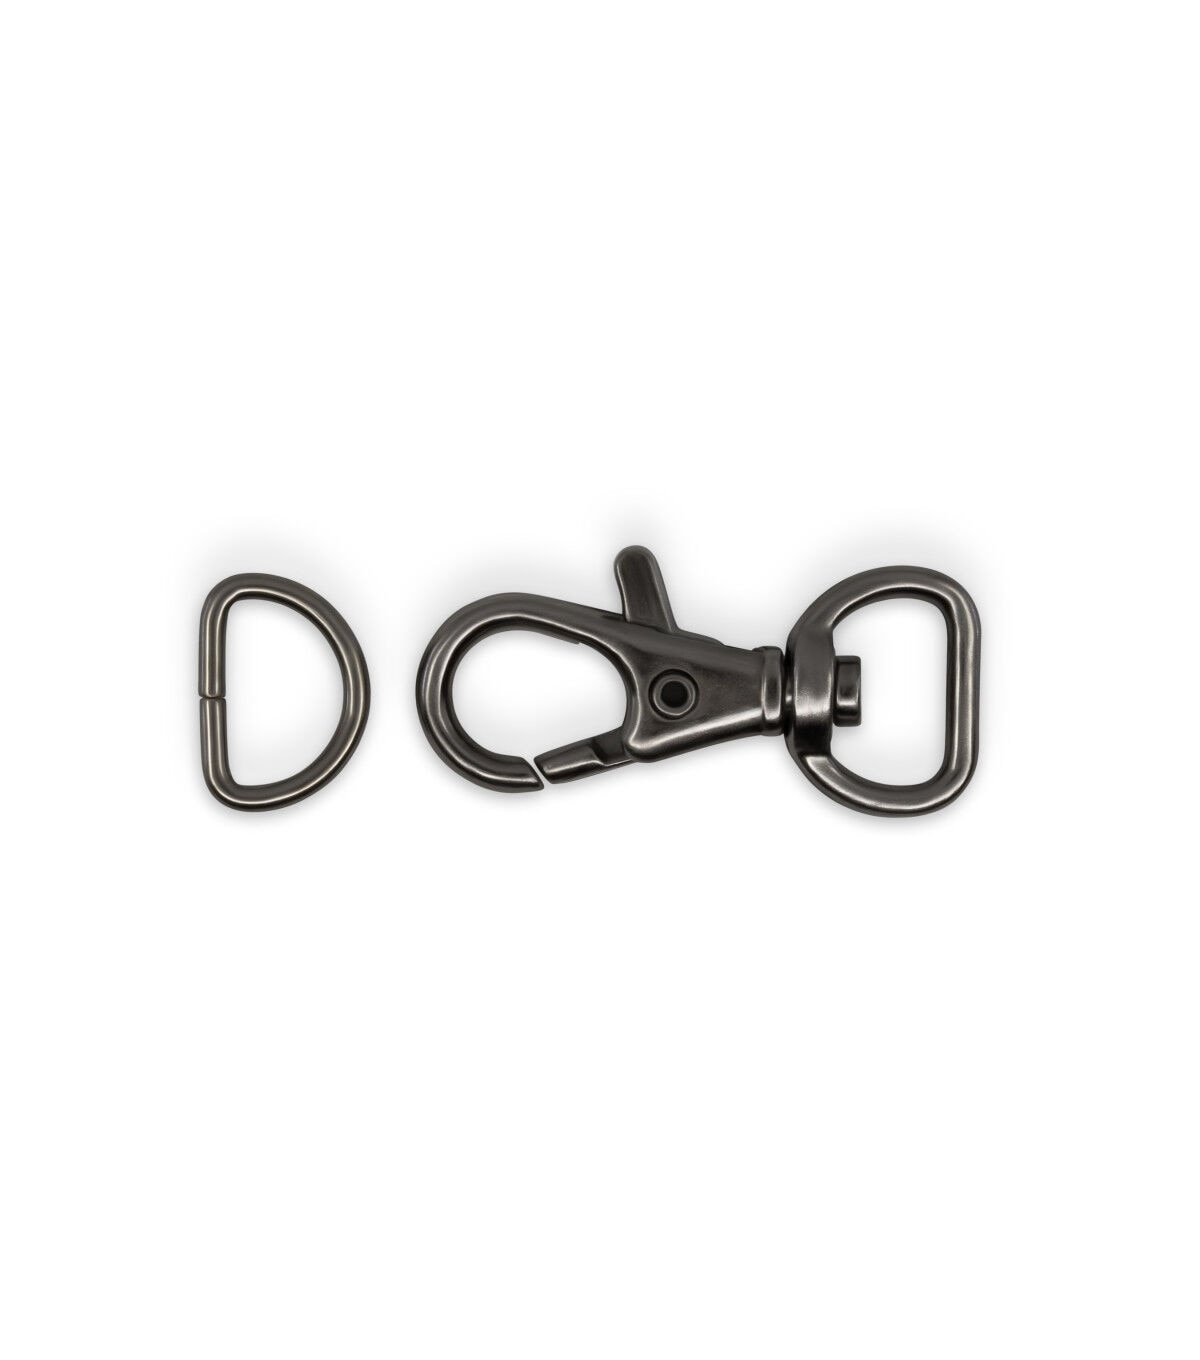 Swivel-D Anchor Universal – Super Anchor Safety